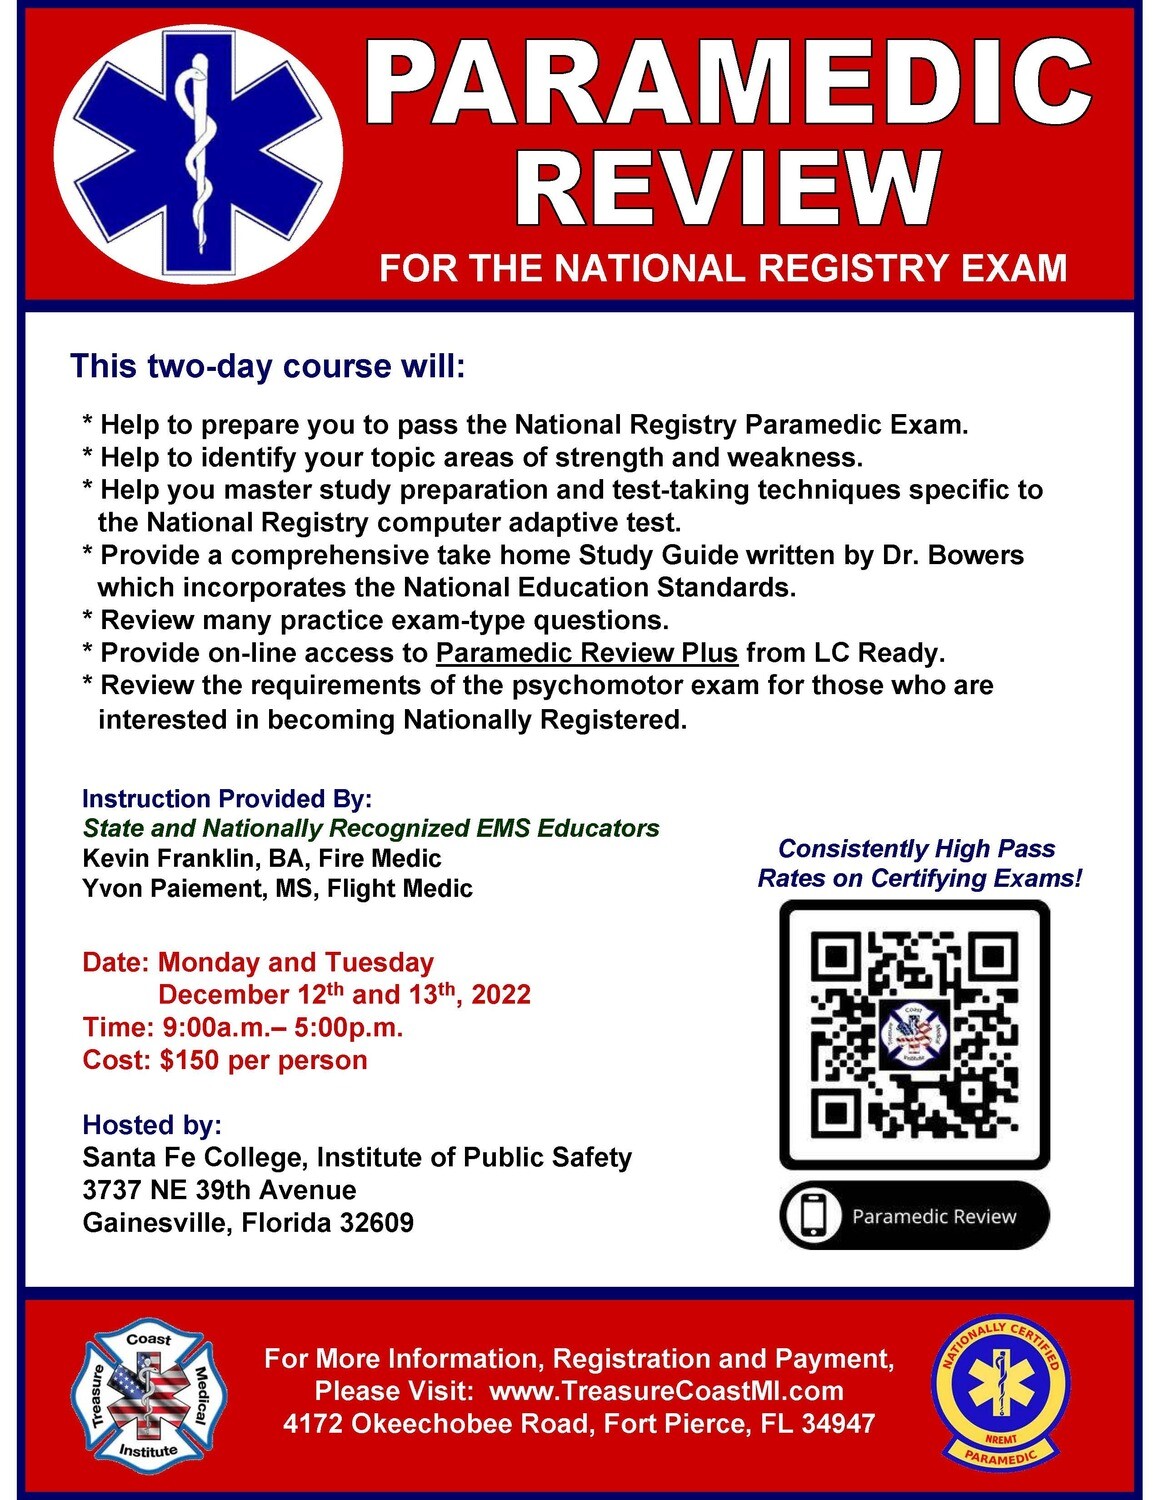 National Registry Paramedic Review December 12th and 13th Gainesville